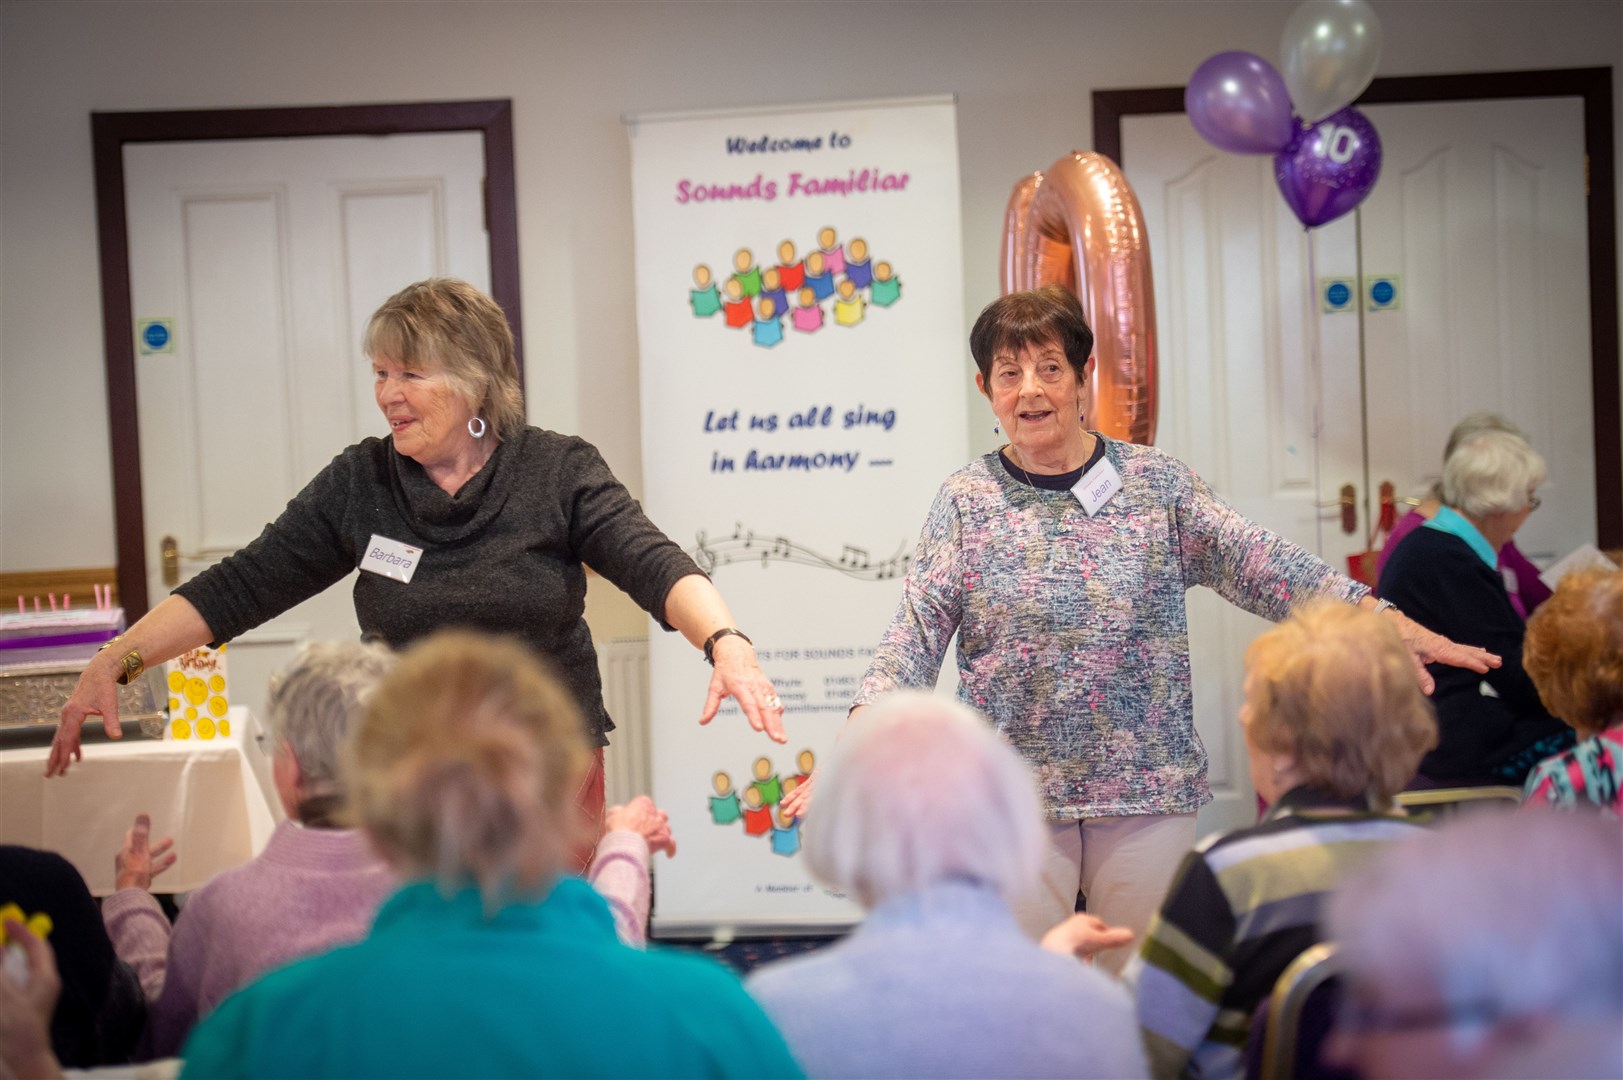 The volunteers encourage people to join in the singing. Picture: Callum Mackay.